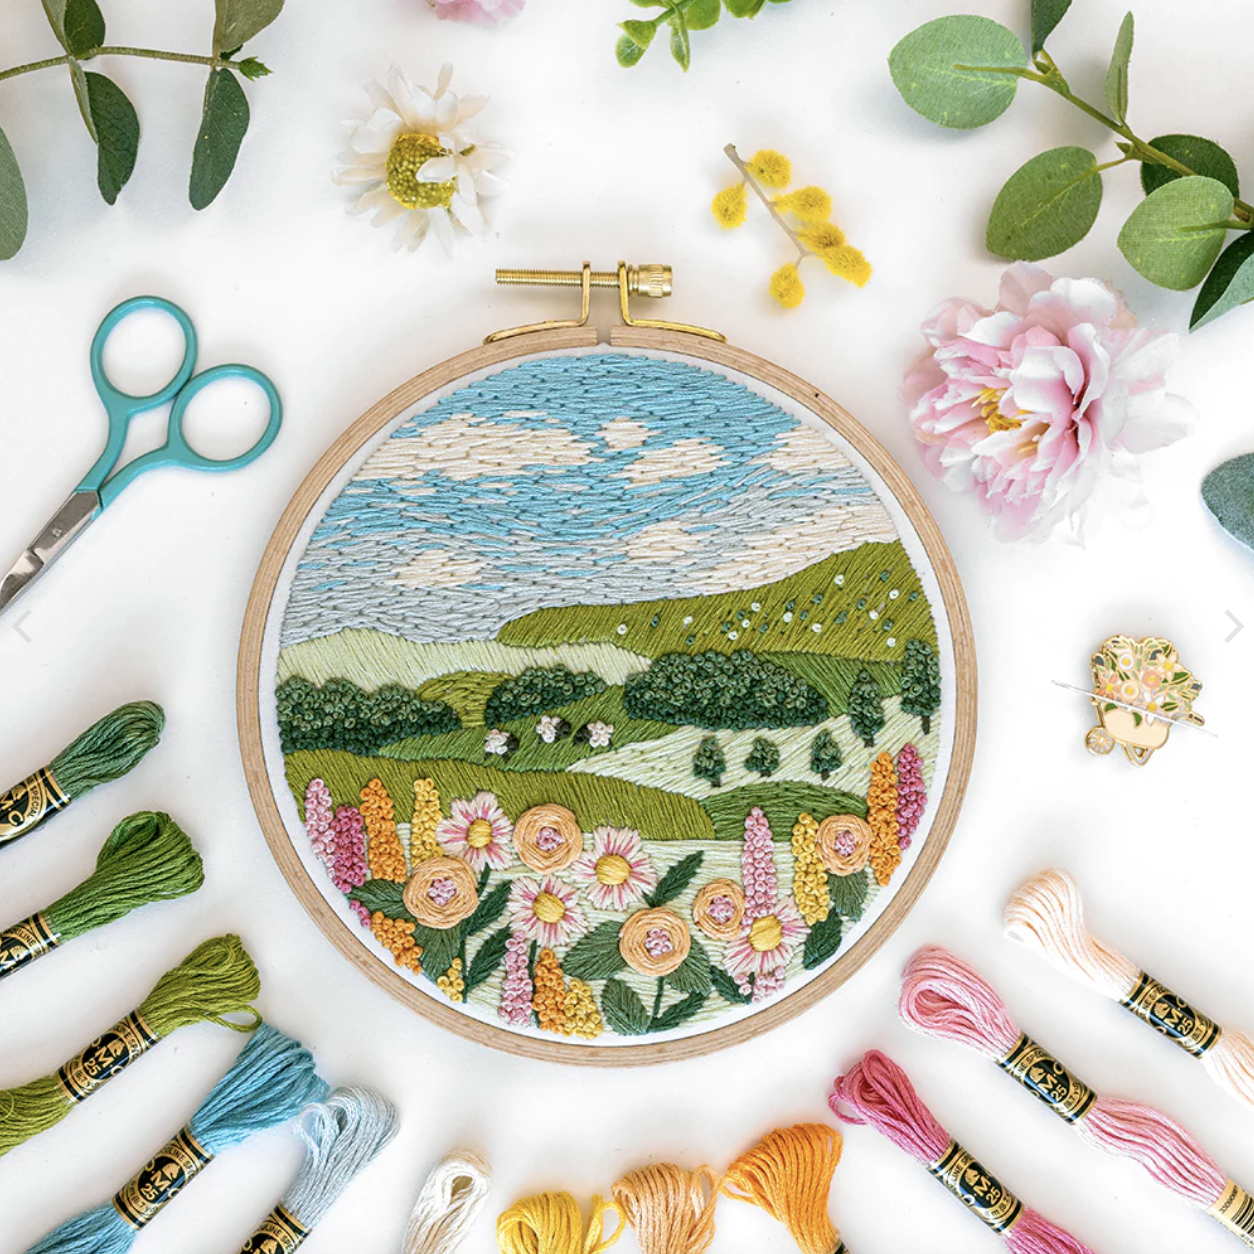 This is an image of the Spring Meadows pattern available to purchase on the Clever Poppy website.